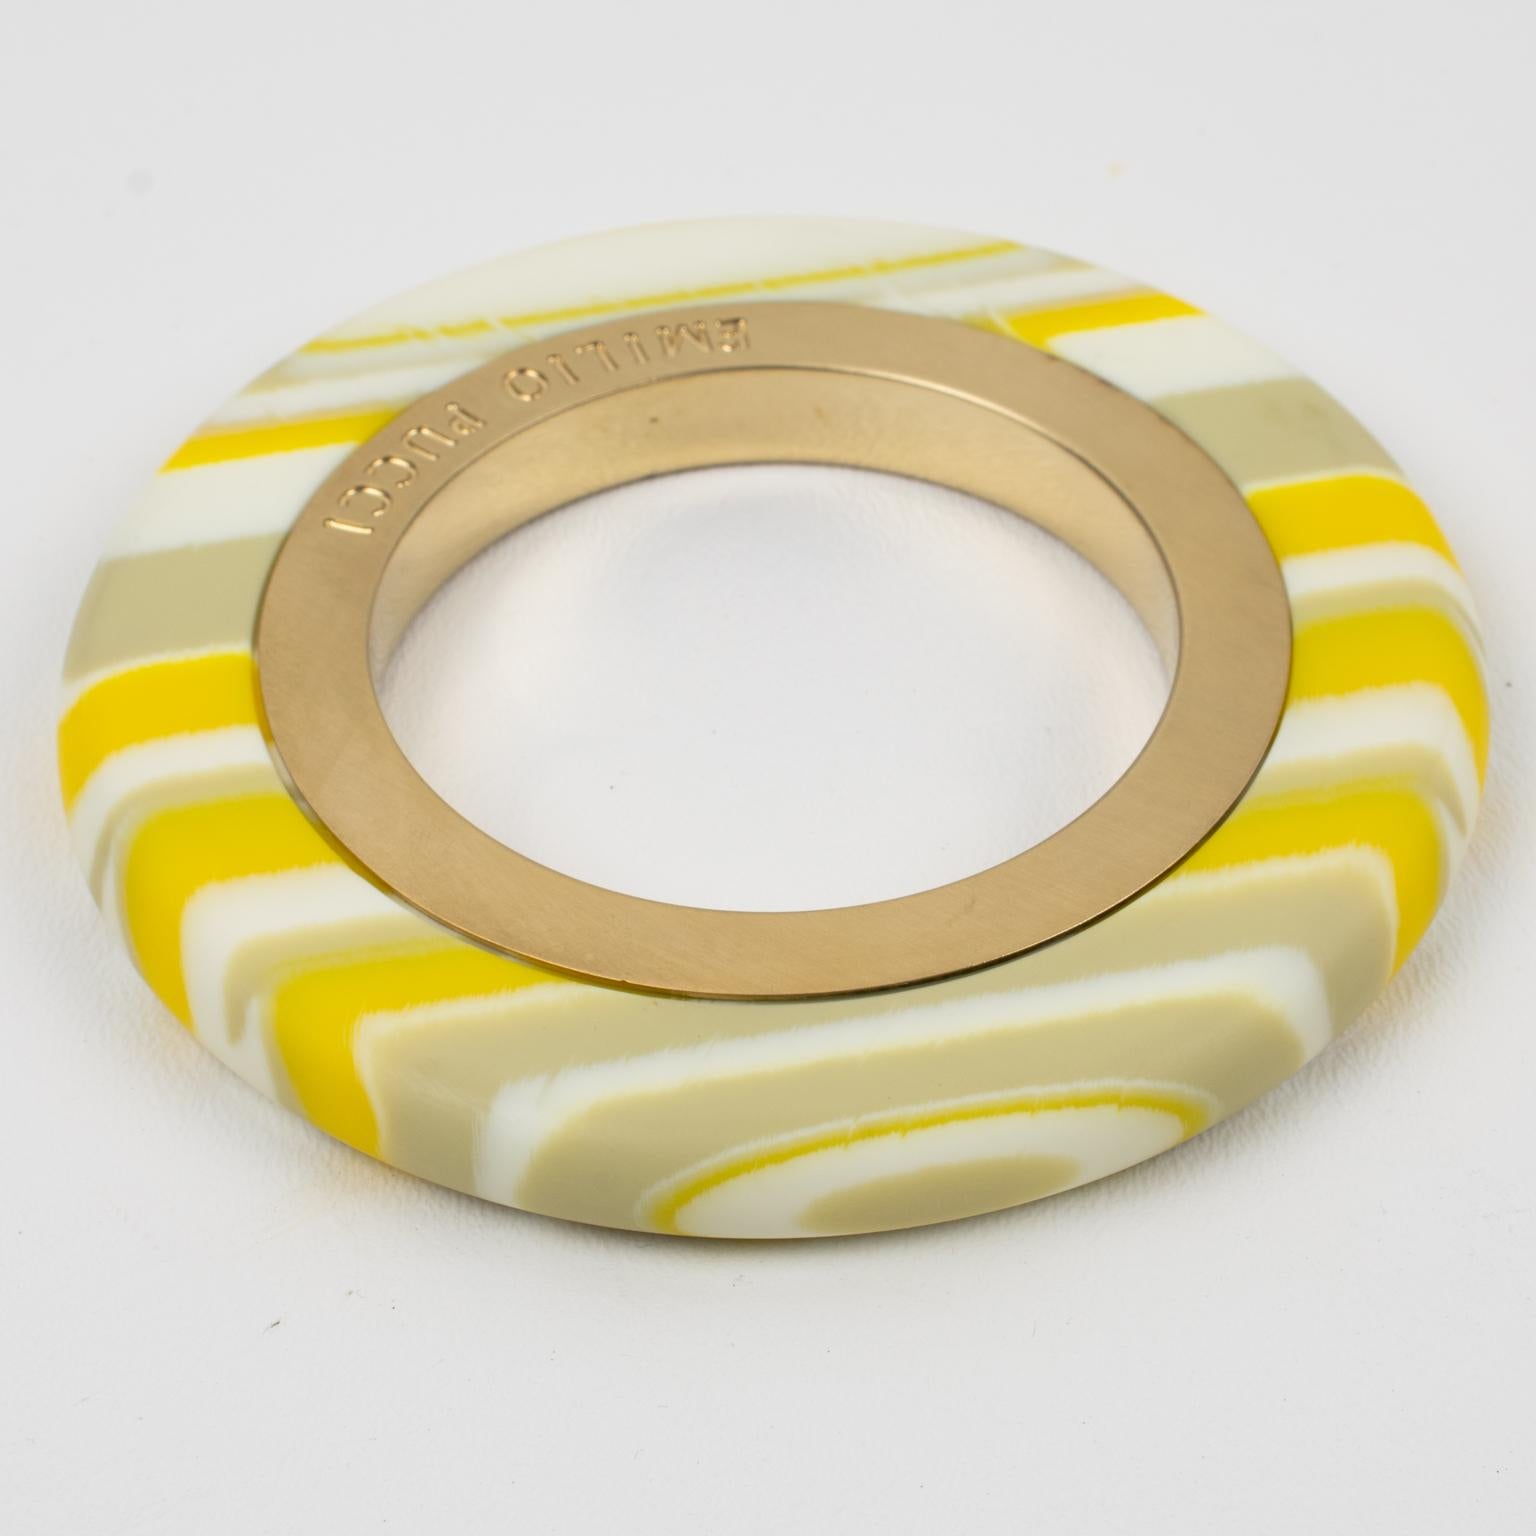 Stunning oversized Emilio Pucci resin and gilt metal bracelet bangle. Chunky bold flat shape with laminated-design builds with satin gilt metal inner band contrasted with yellow, gray, and white multi-layers resin outer band. Emilio Pucci's hallmark